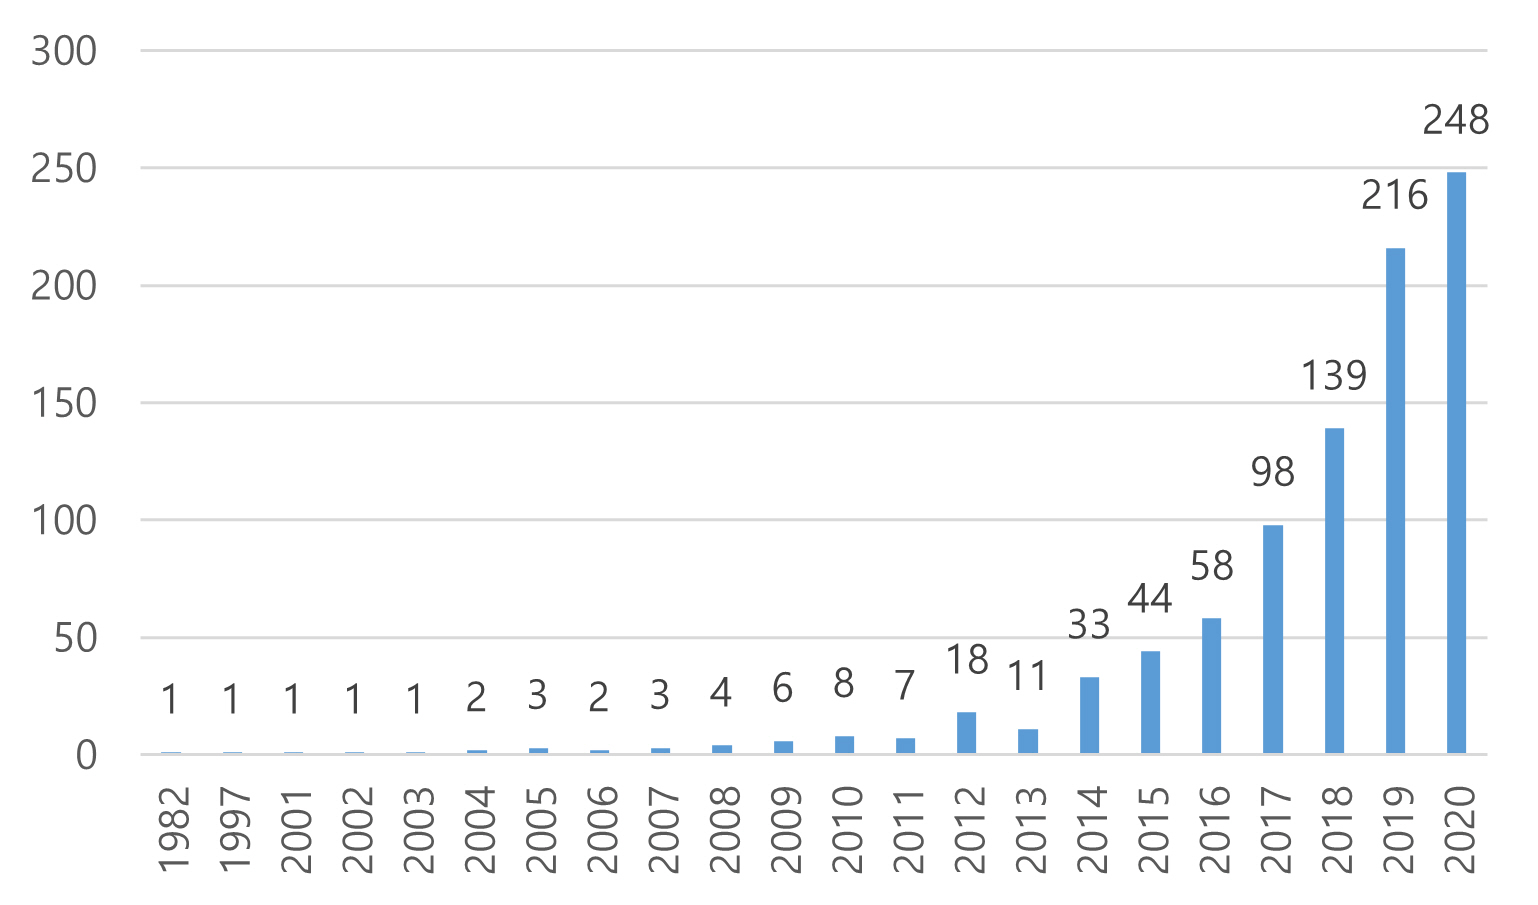 Figure 2: the trend of open science articles